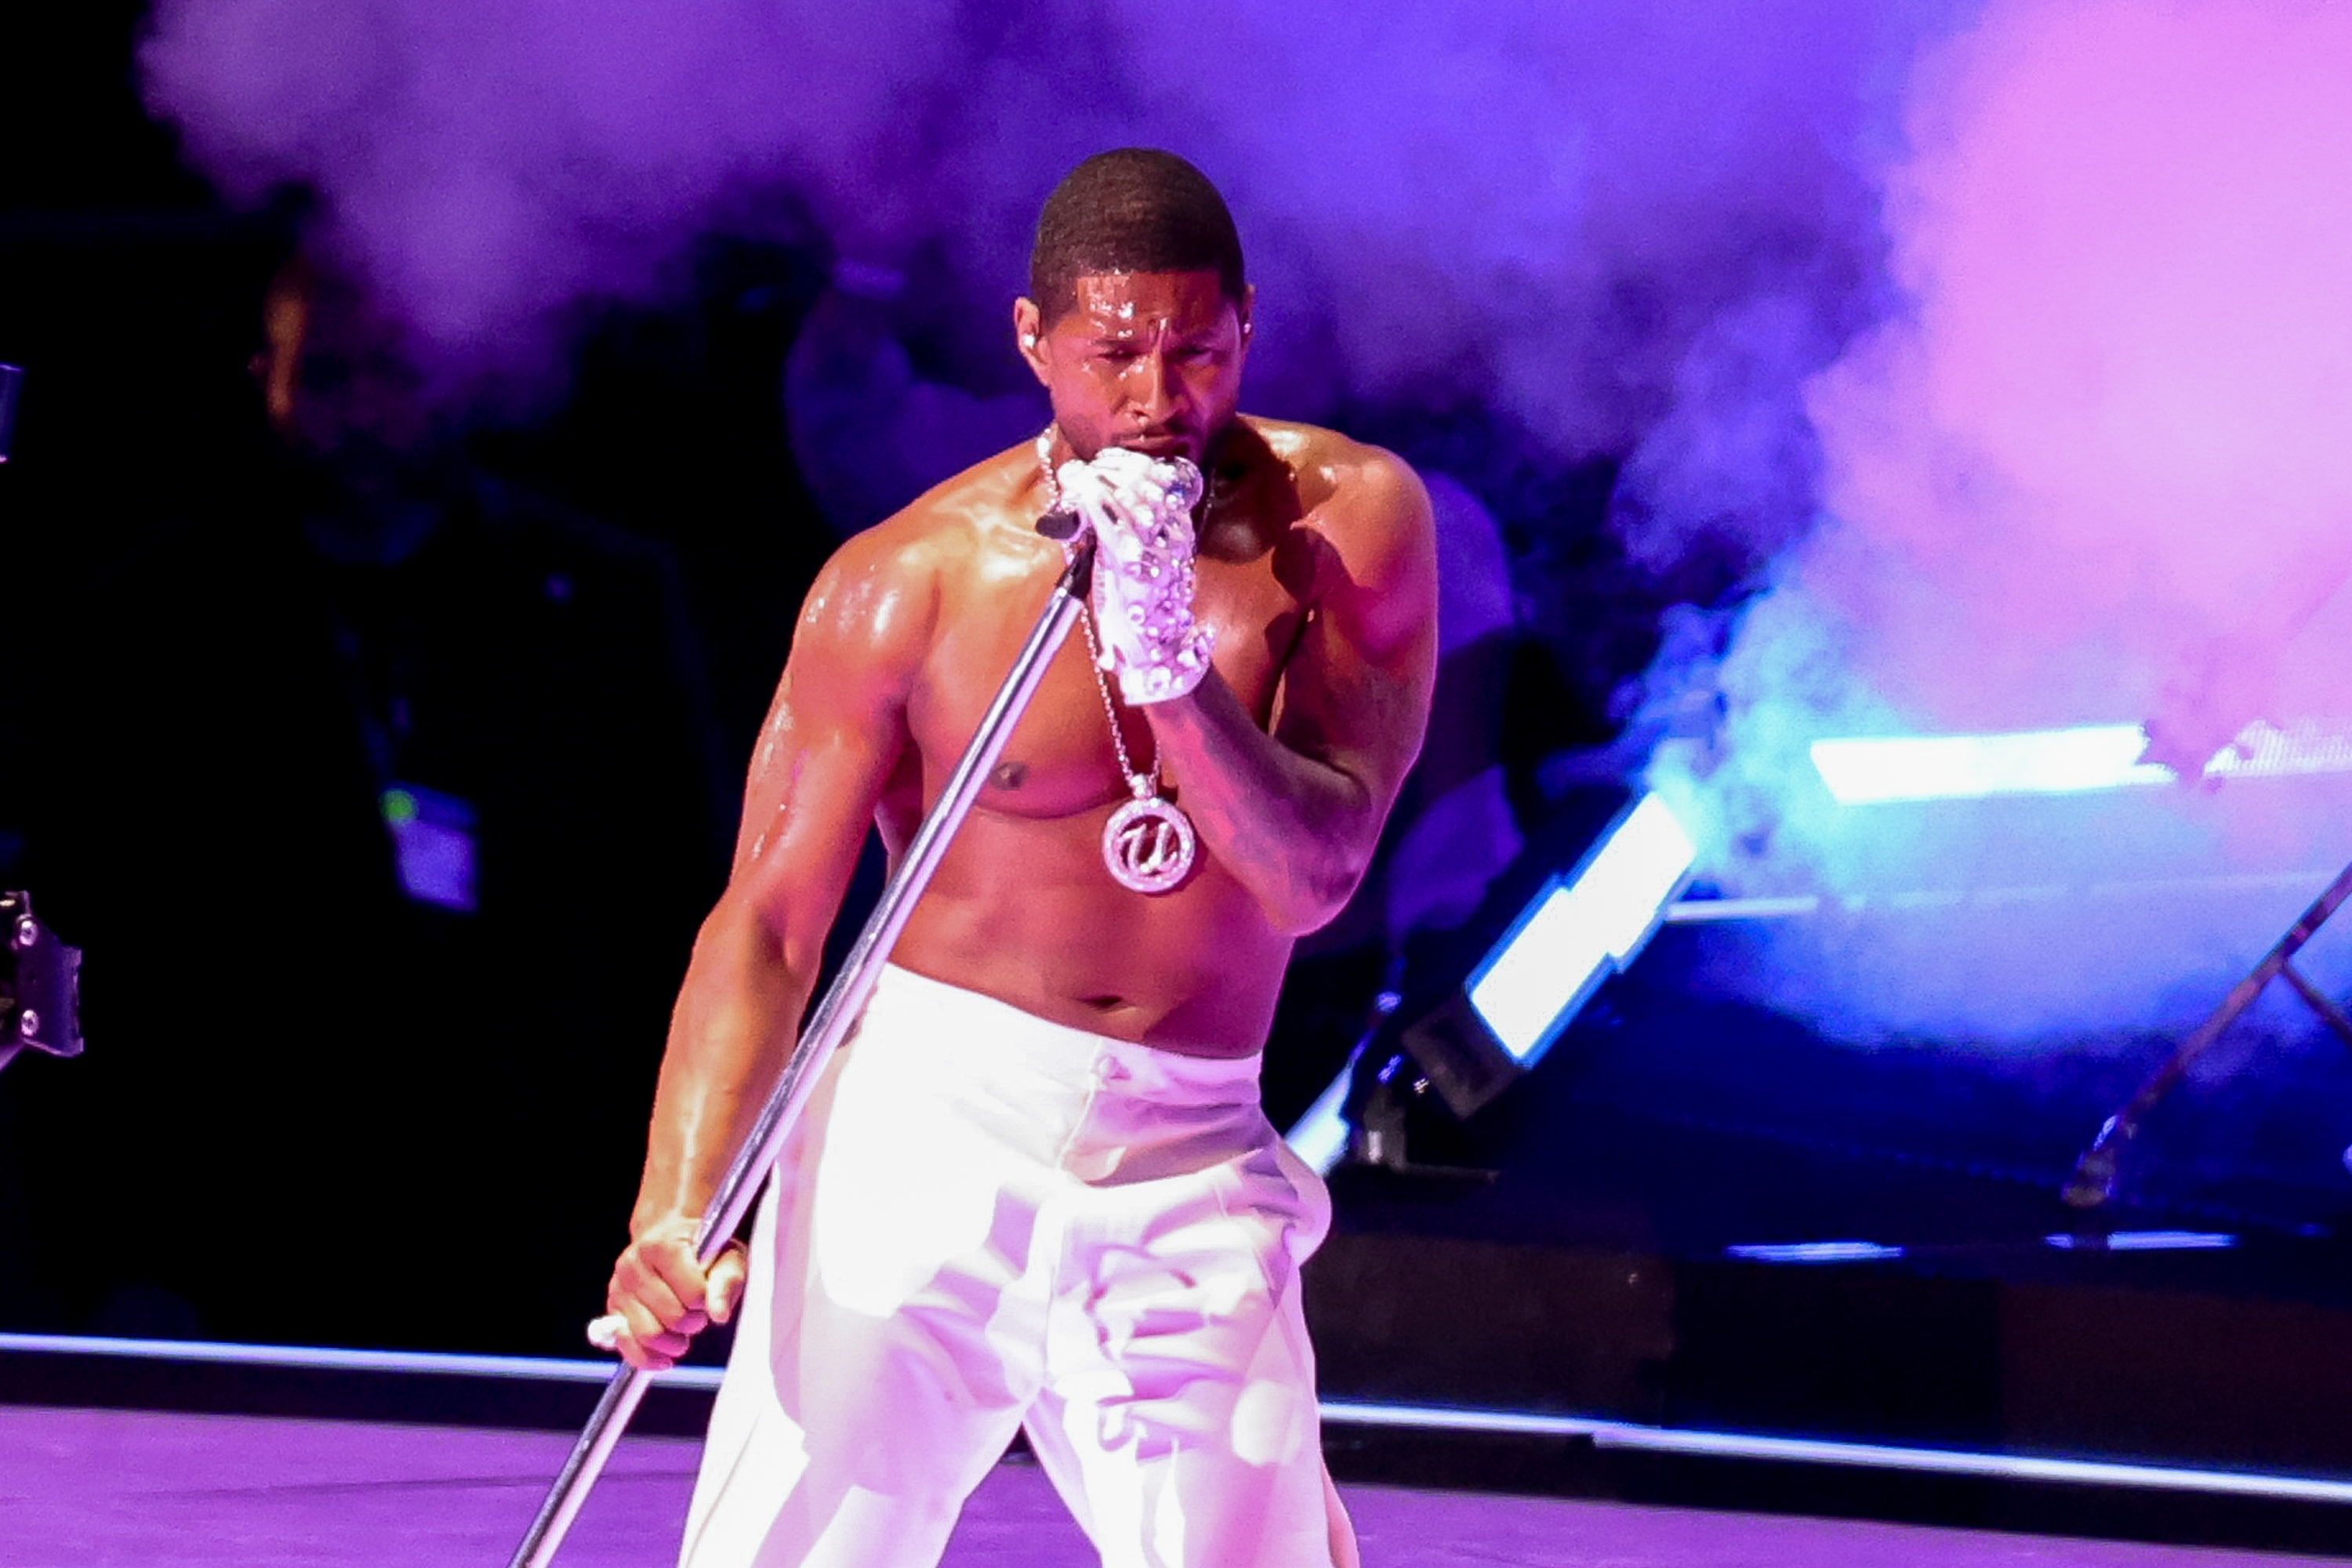 Usher onstage at the Super Bowl